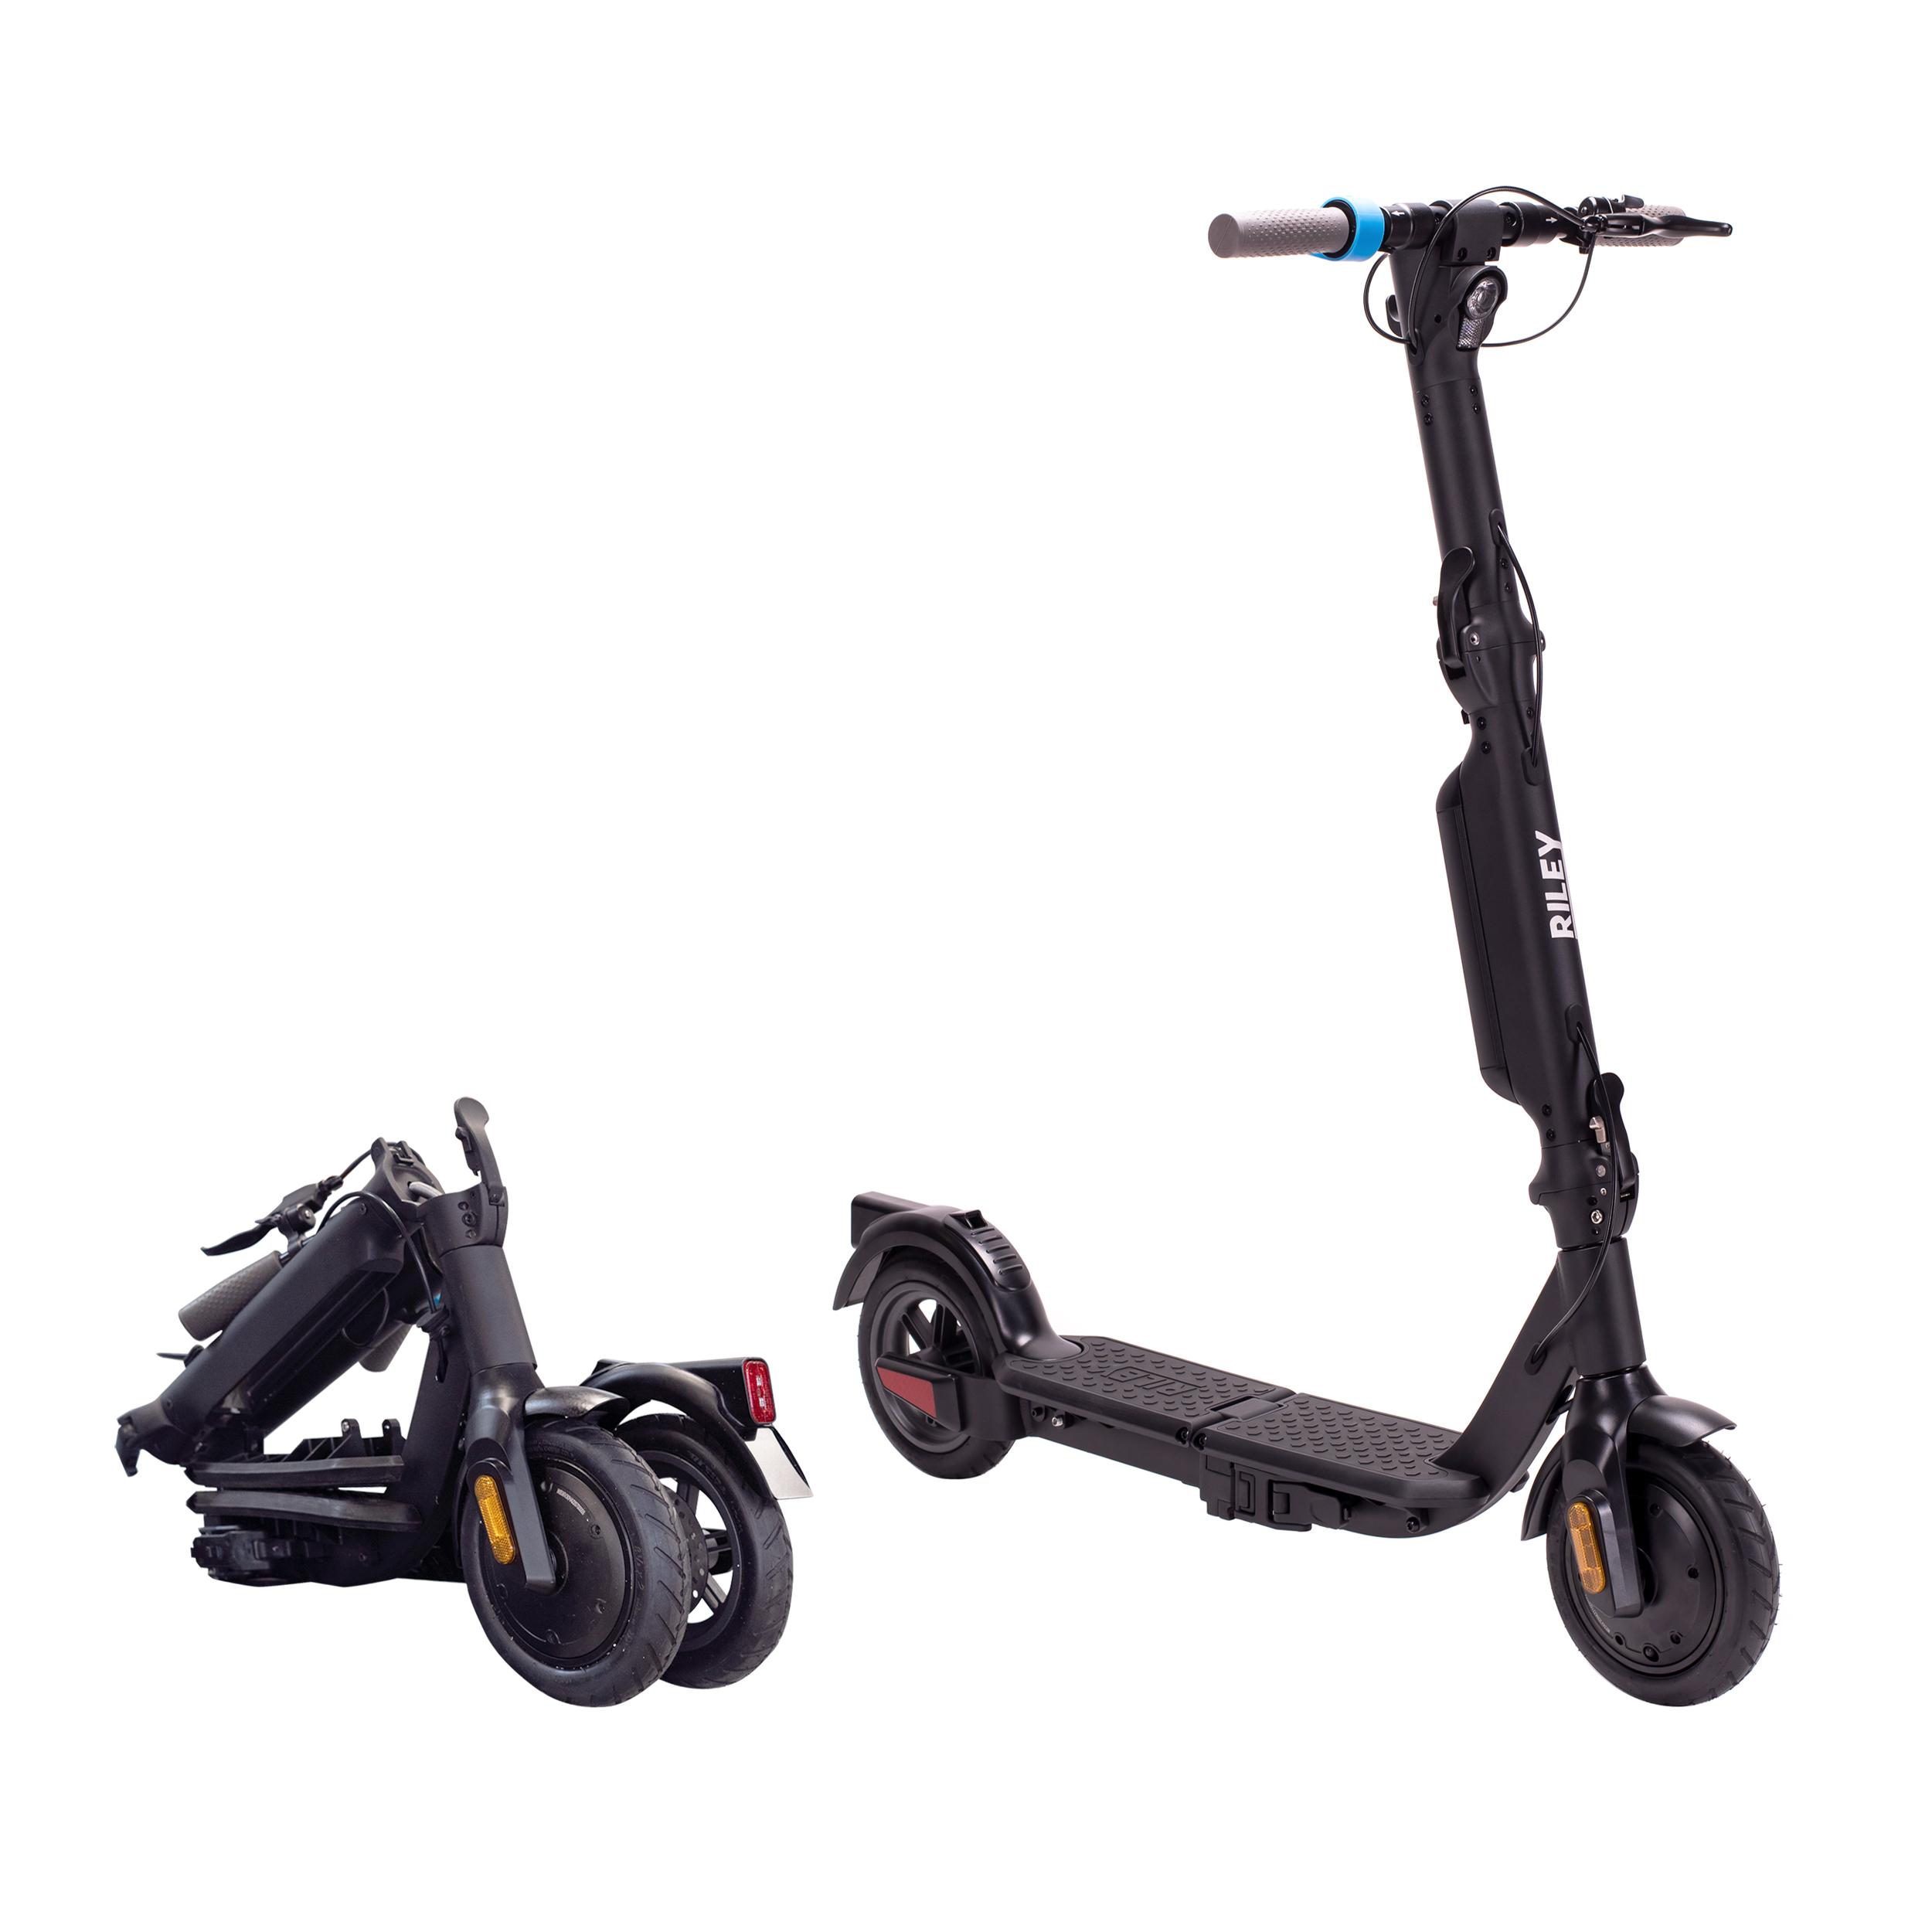 RILEY RS3 Electric Folding Scooter - Black, Black